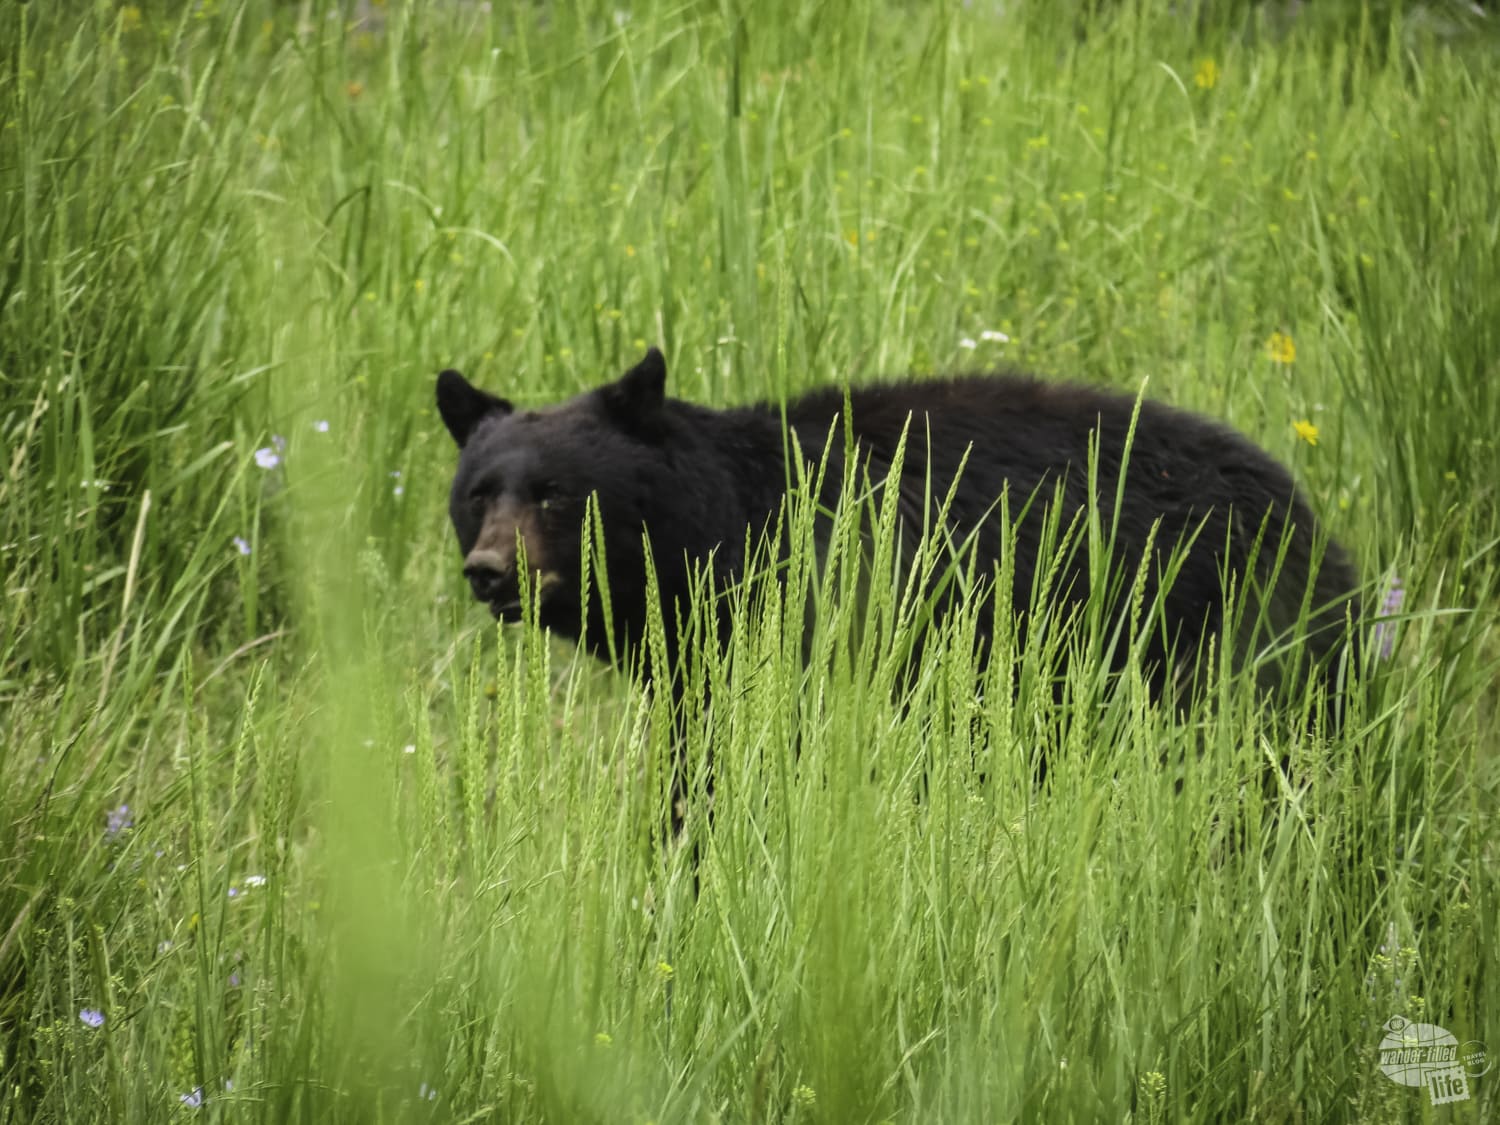 We met bears on one of our Yellowstone hikes!